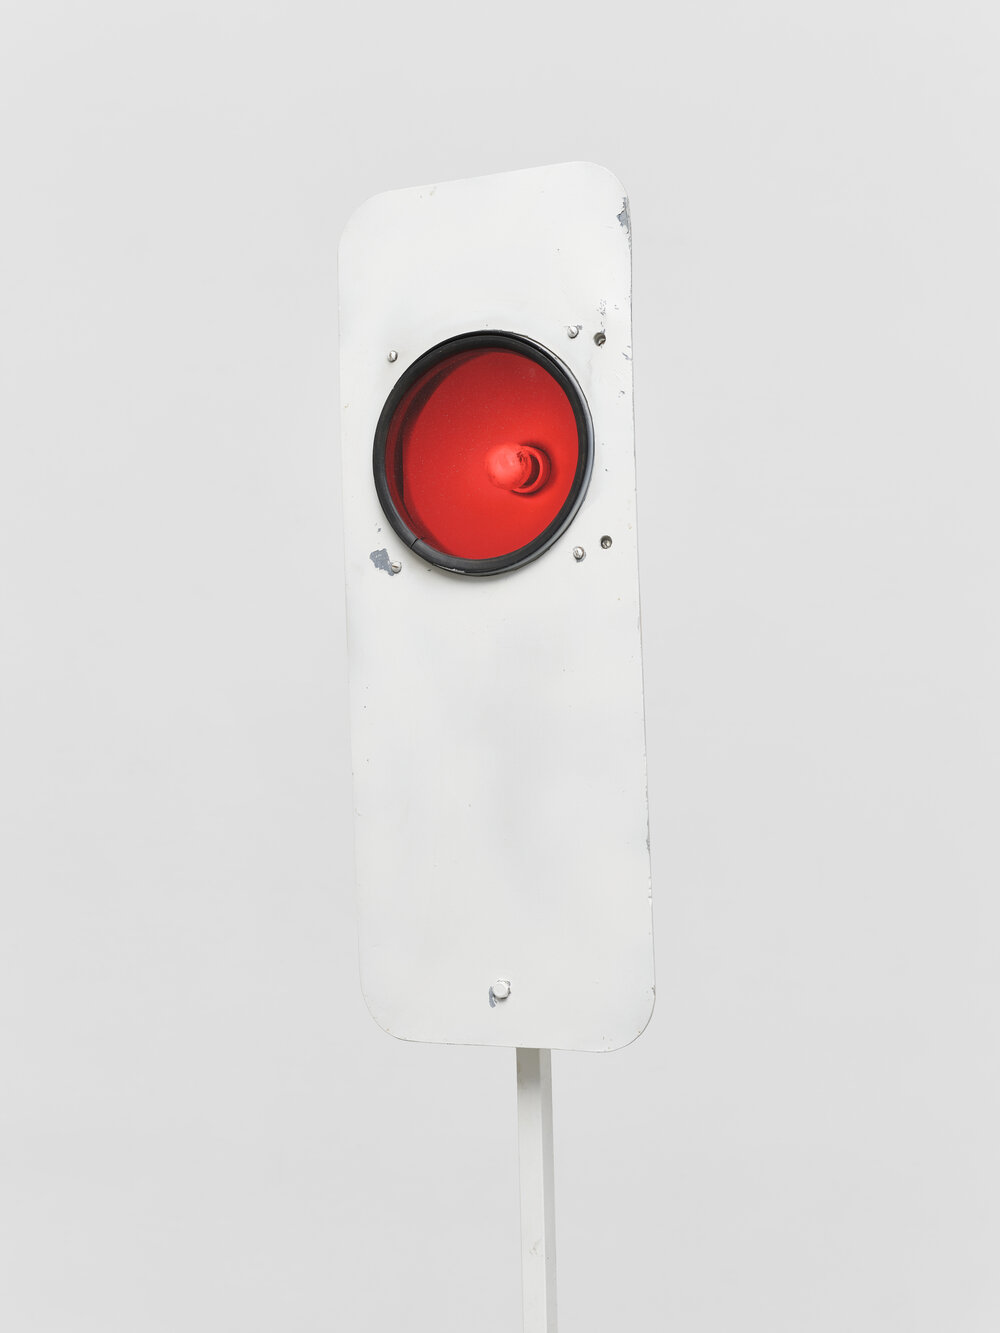  Signal, 1964. Painted iron, electrical circuit and light 993/16x1415/16 x1415/16 in.(252x38 x 38 cm) © Takis Foundation.   Photo © White Cube (Theo Christelis) 